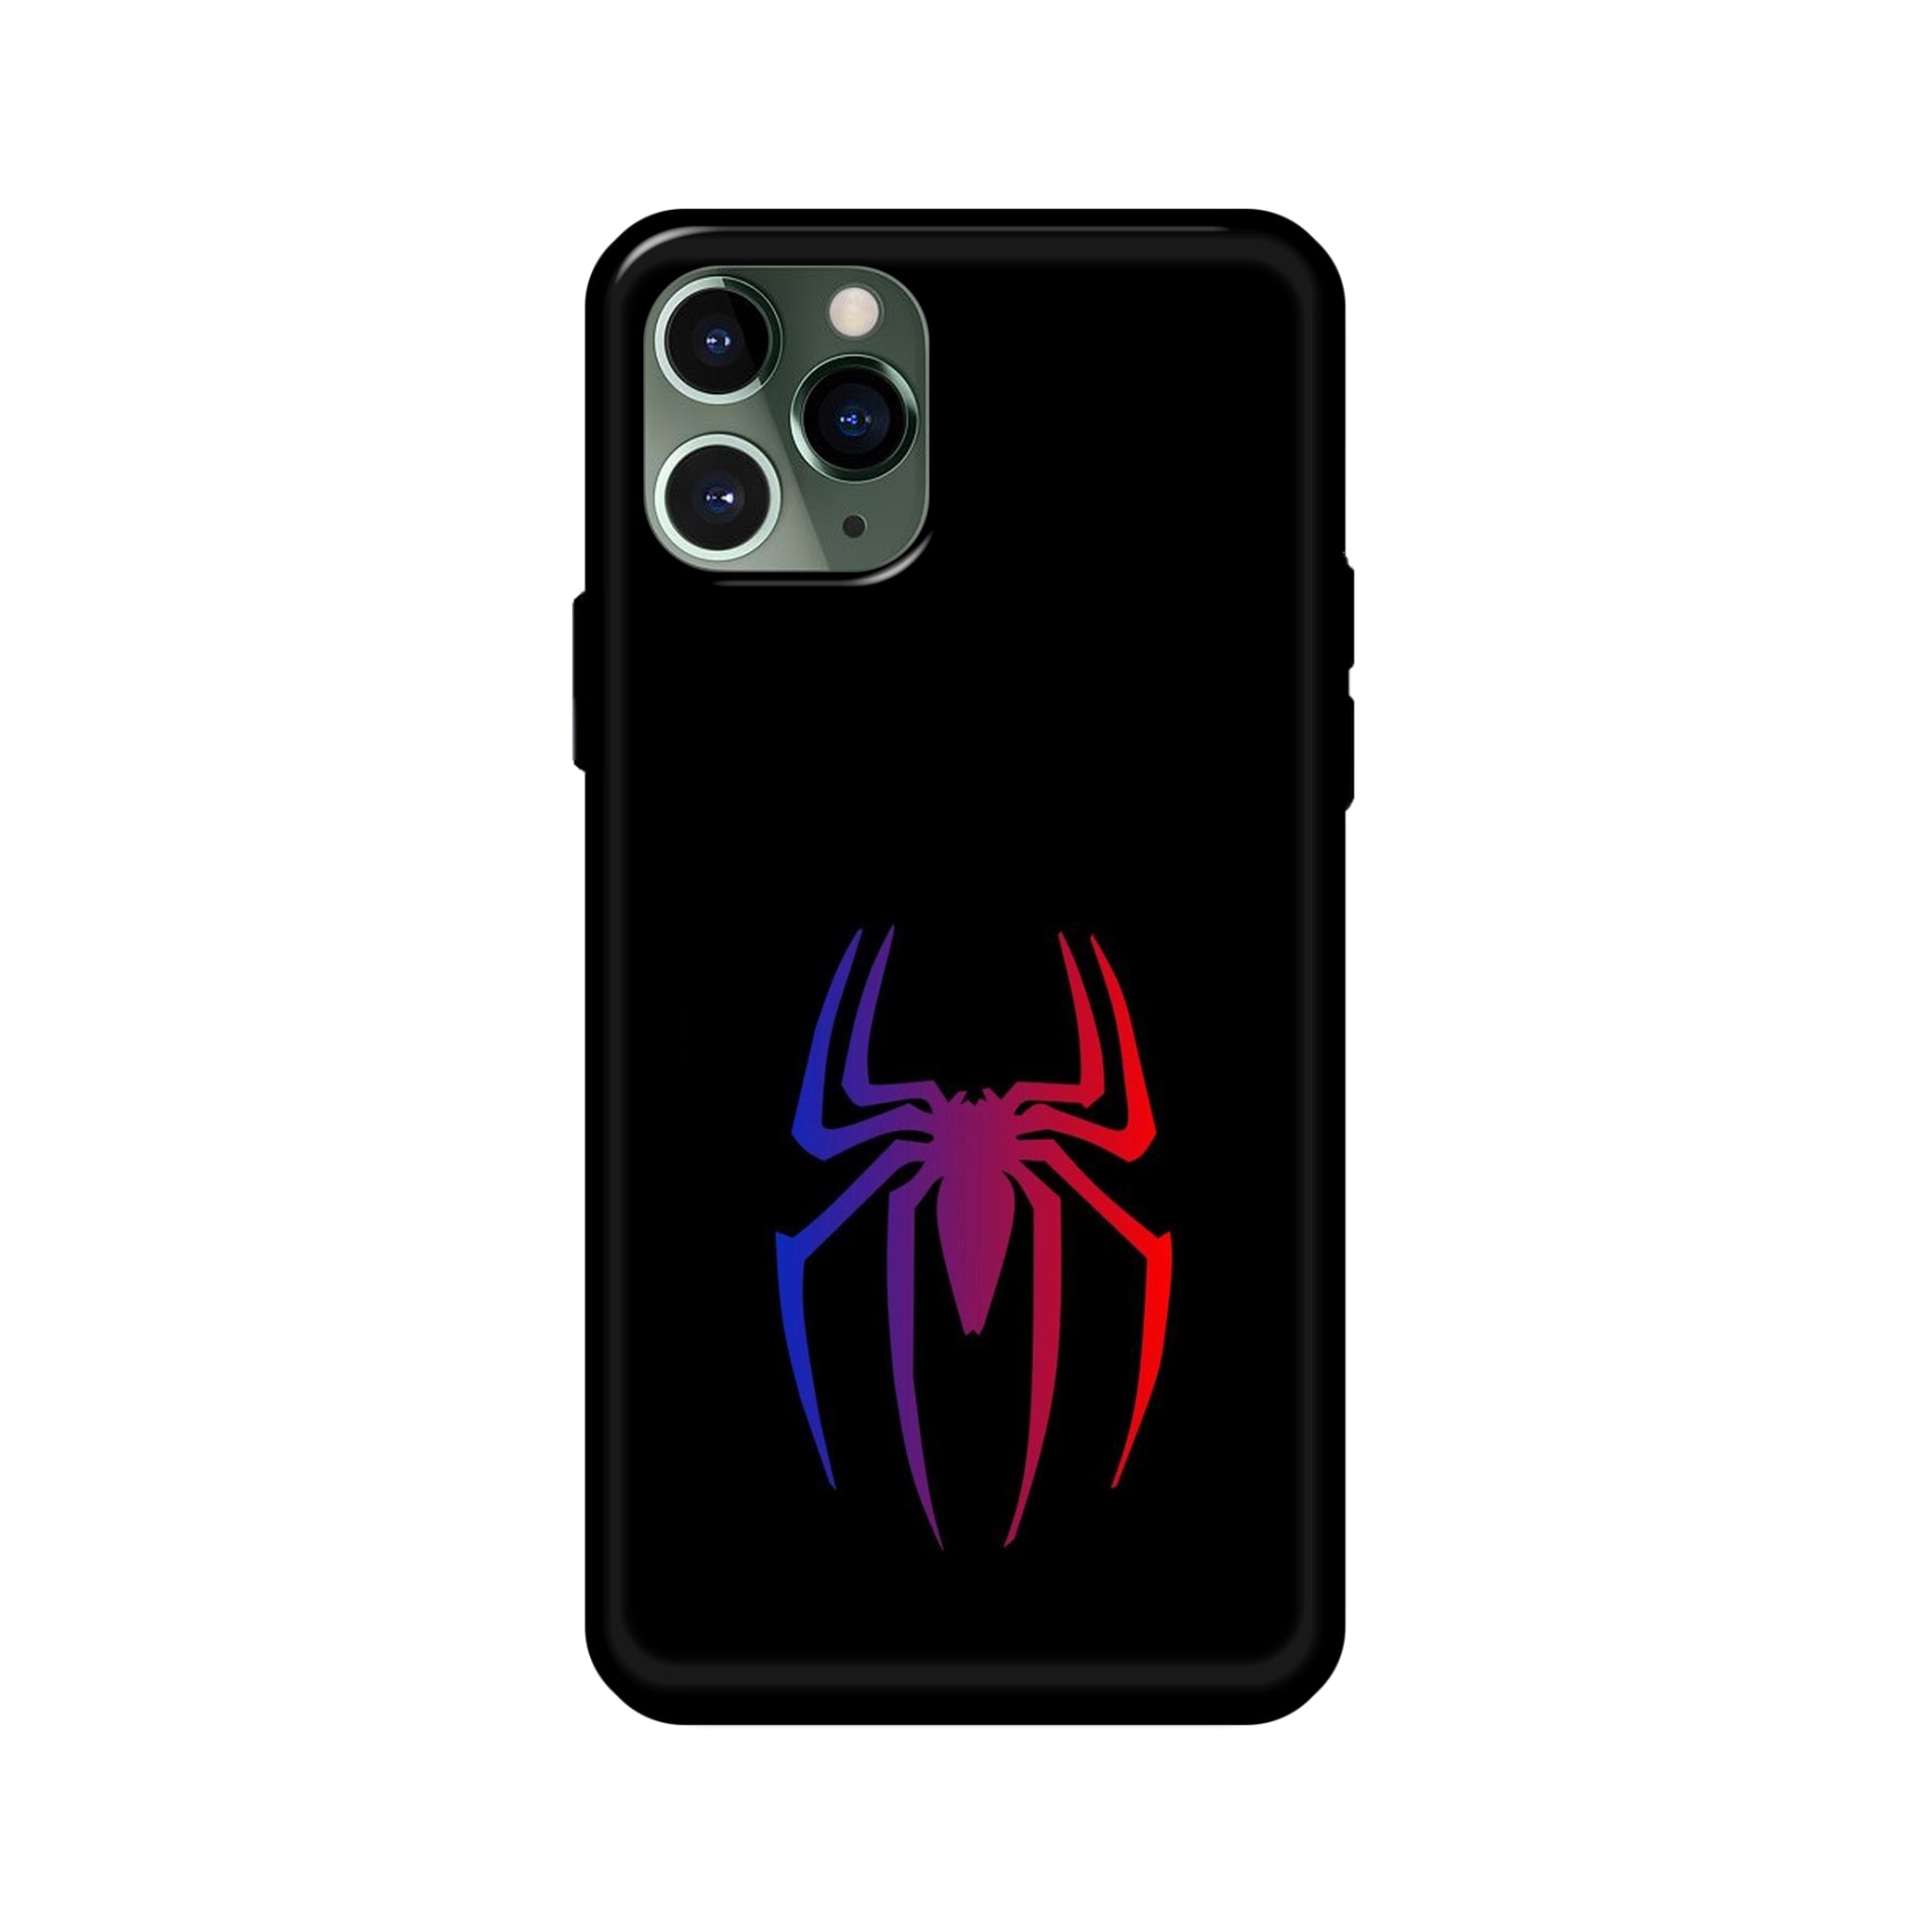 Buy Neon Spiderman Logo Glass/Metal Back Mobile Phone Case/Cover For iPhone 11 Pro Online